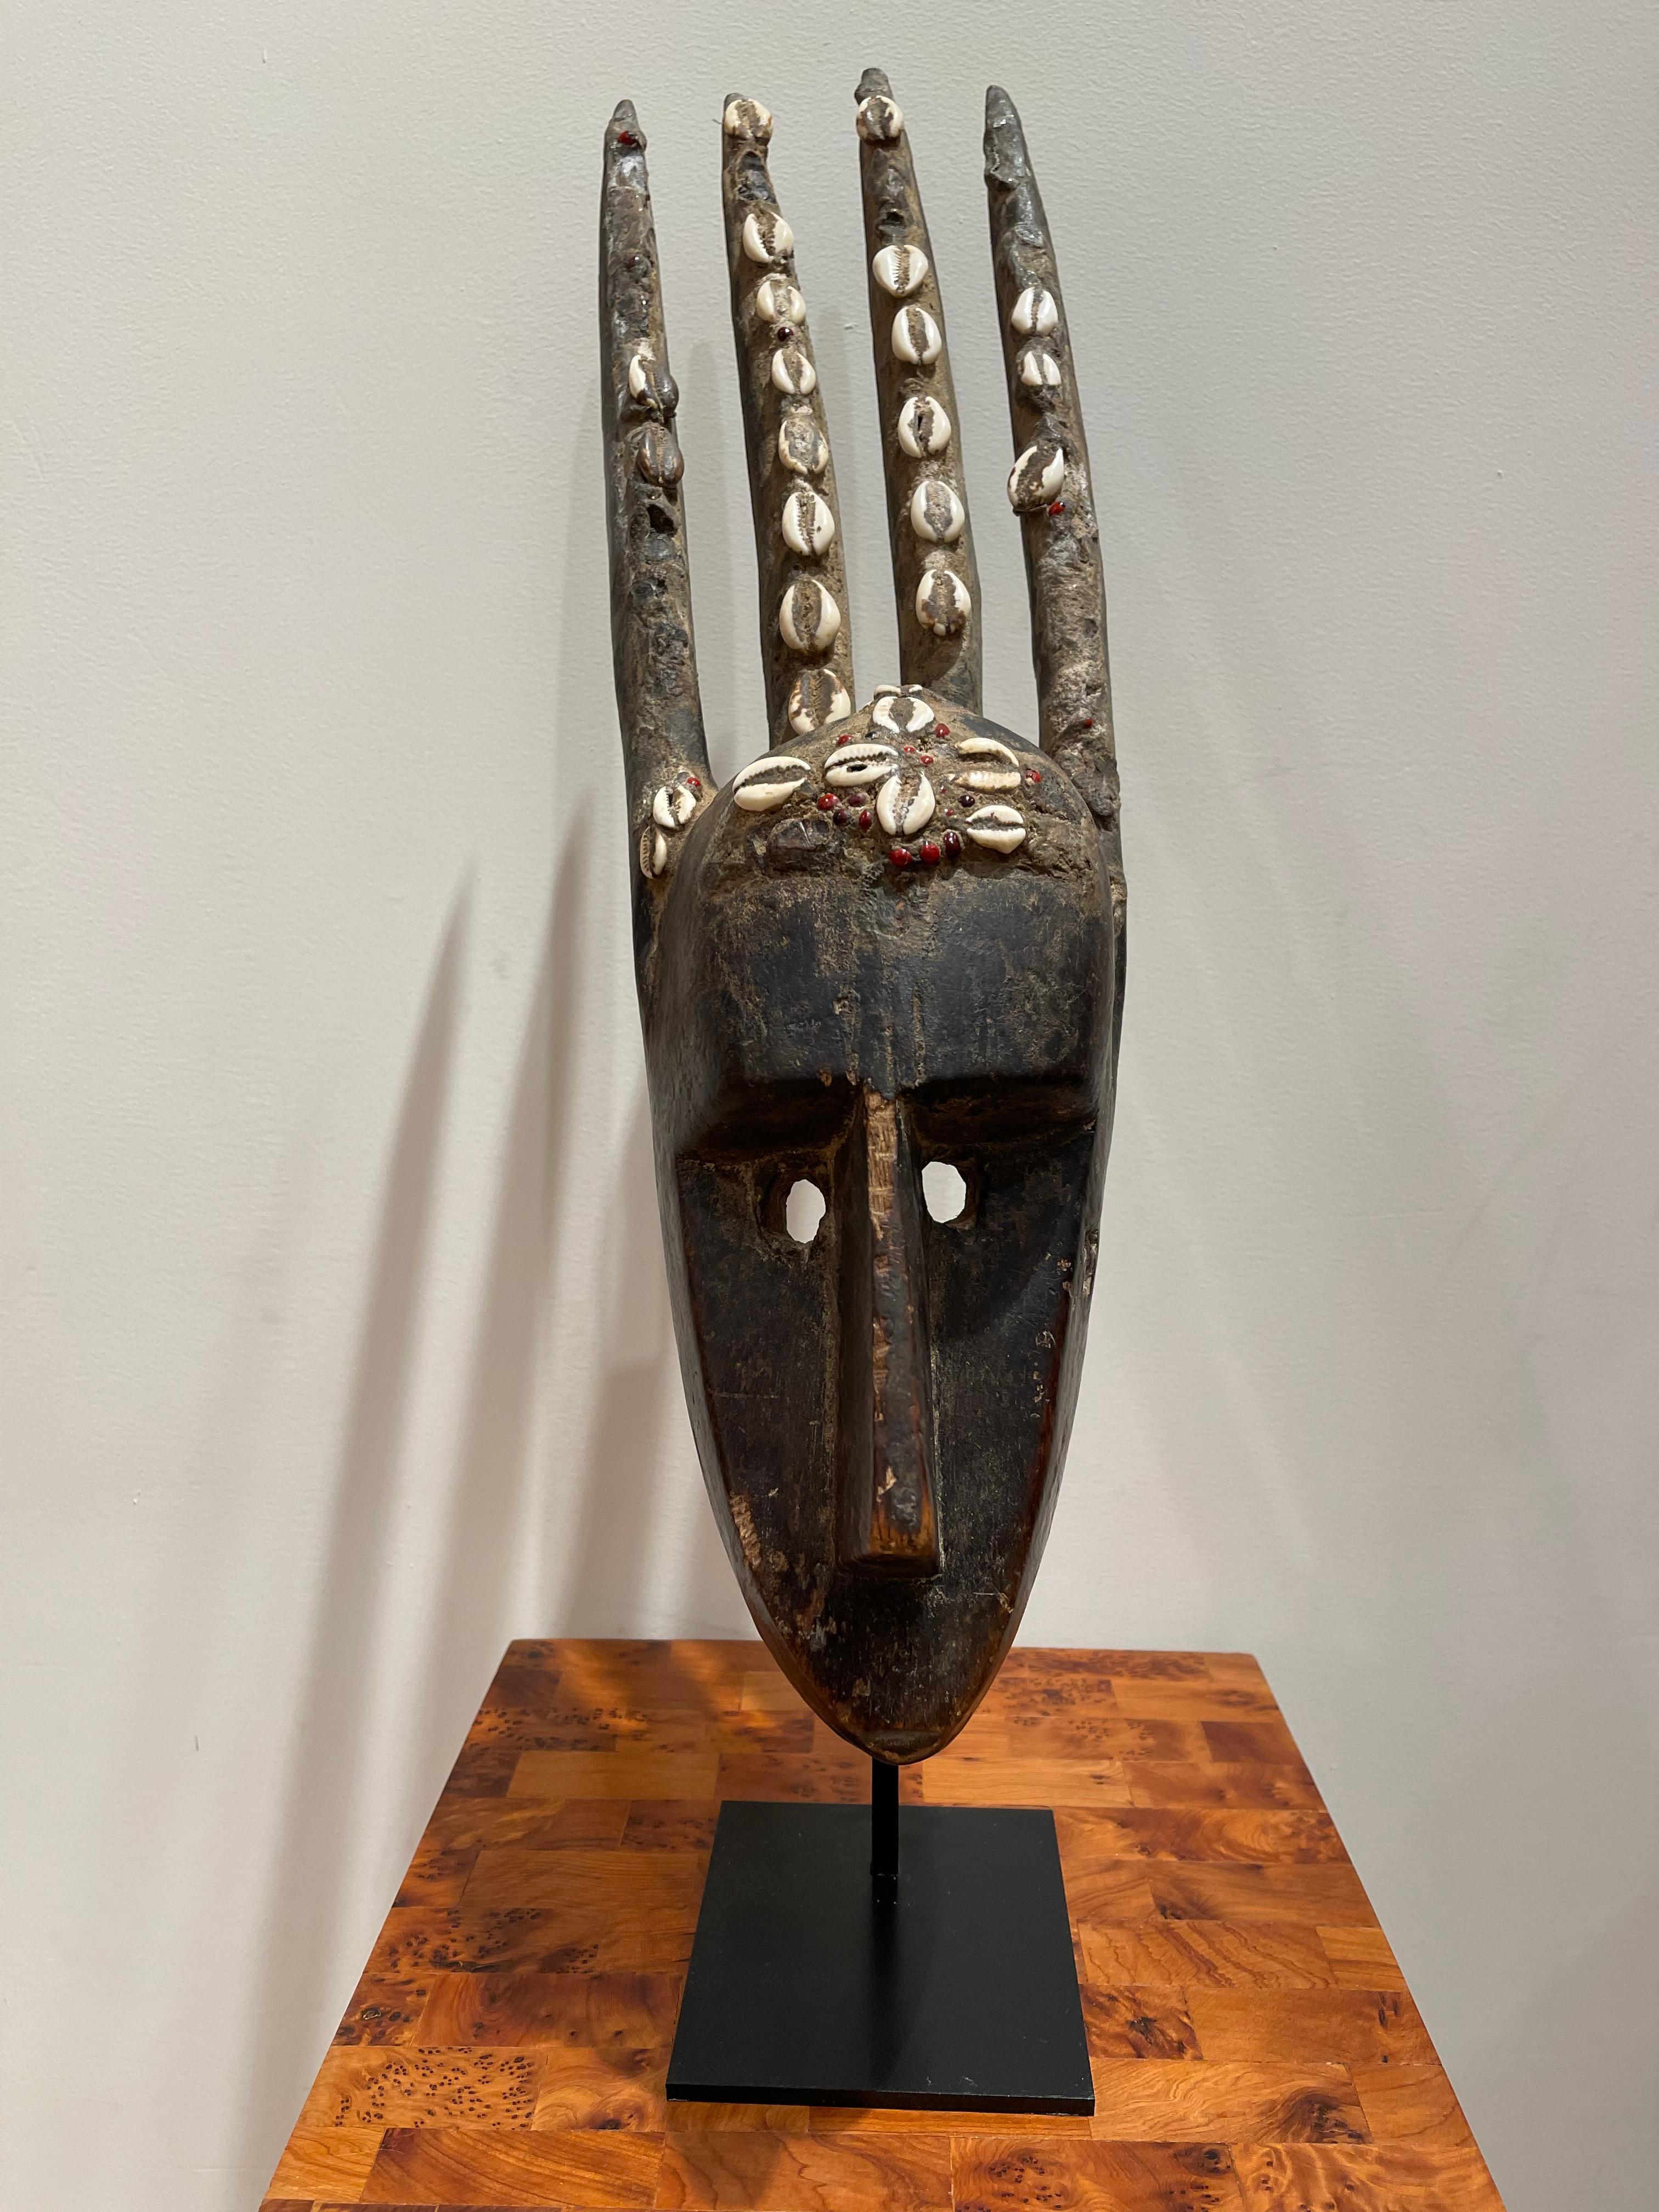 
Splendid four rams  Ntomo Mask, Bamana Population, Mali
Four Rams, Ntomo Mask, Mali, Wood and cowrie shells. Dimensions: 52 x 14.5 cm 20.48 x 5.51inches
The Ntomo mask is used in the initiation rituals of young men in populations across Western